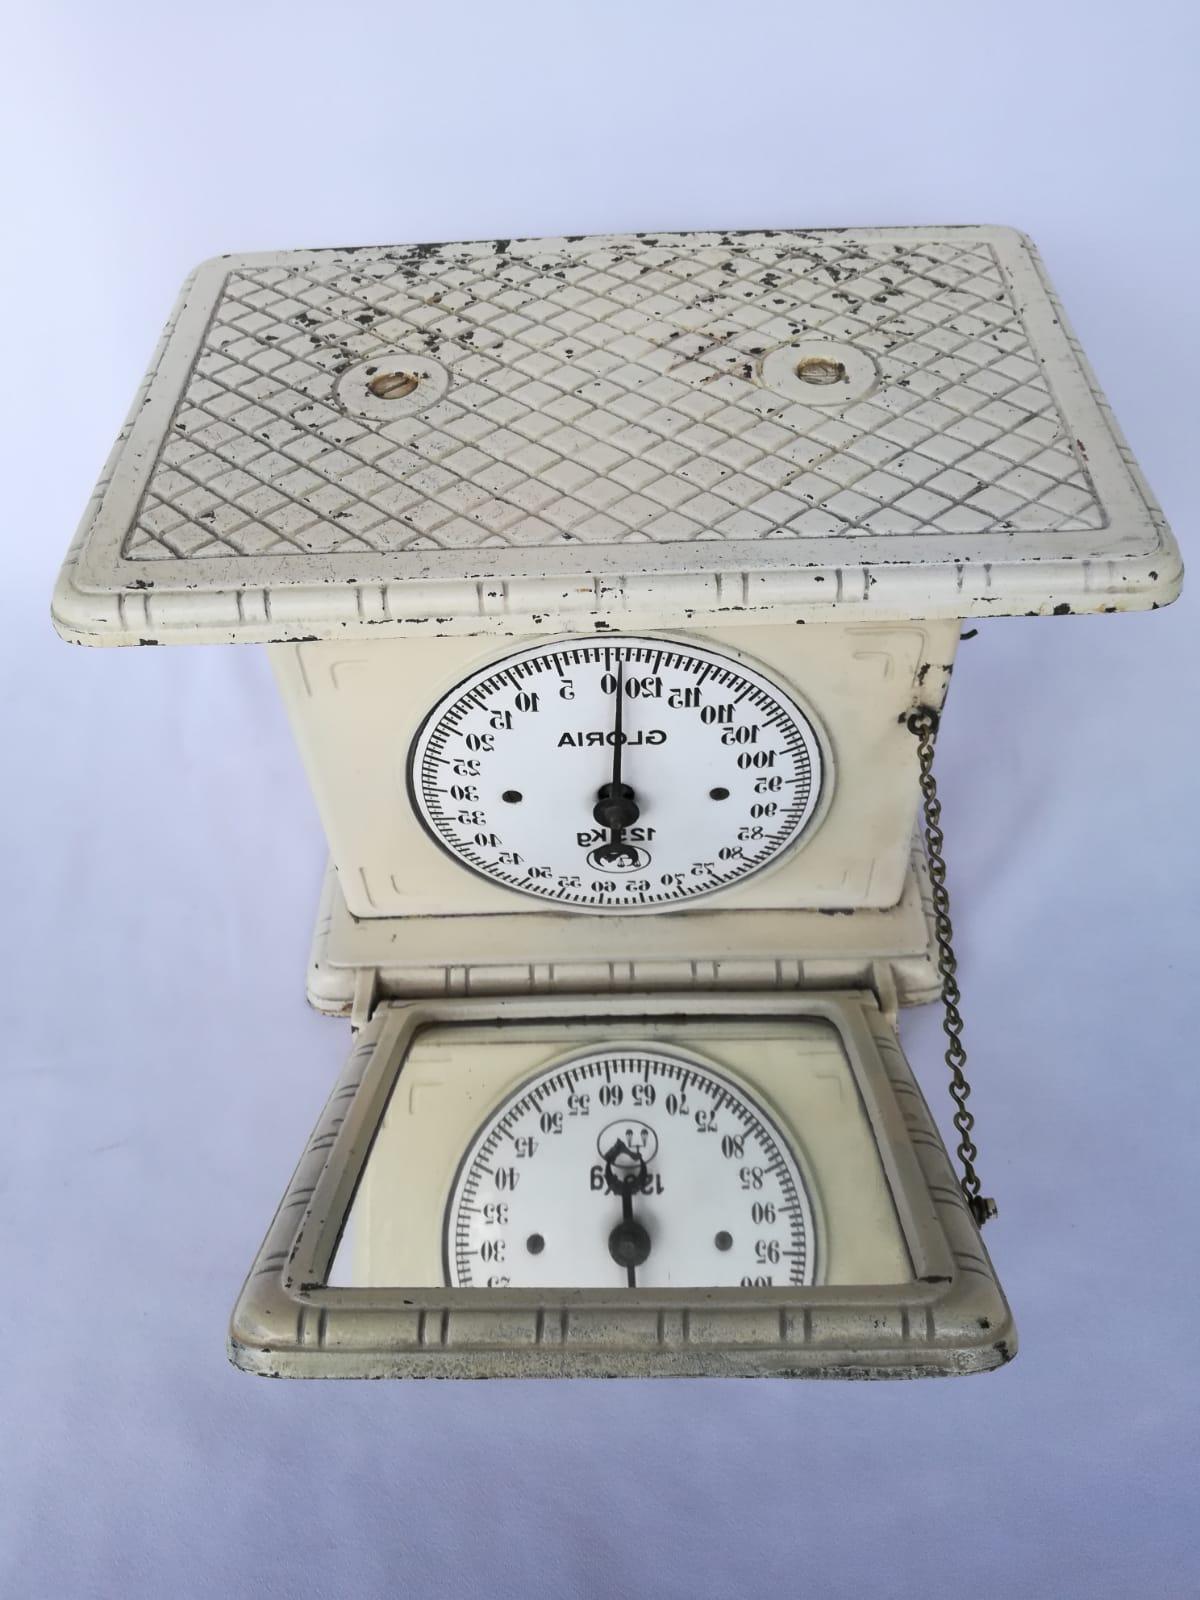 This beautiful scale dates back to circa 1900-1920. by Gloria brand. It's made in cast iron with an enamel dial that is reflected in a folding mirror plate with the possibility to close it. It was used a lot in hospitals and doctor's offices. It's